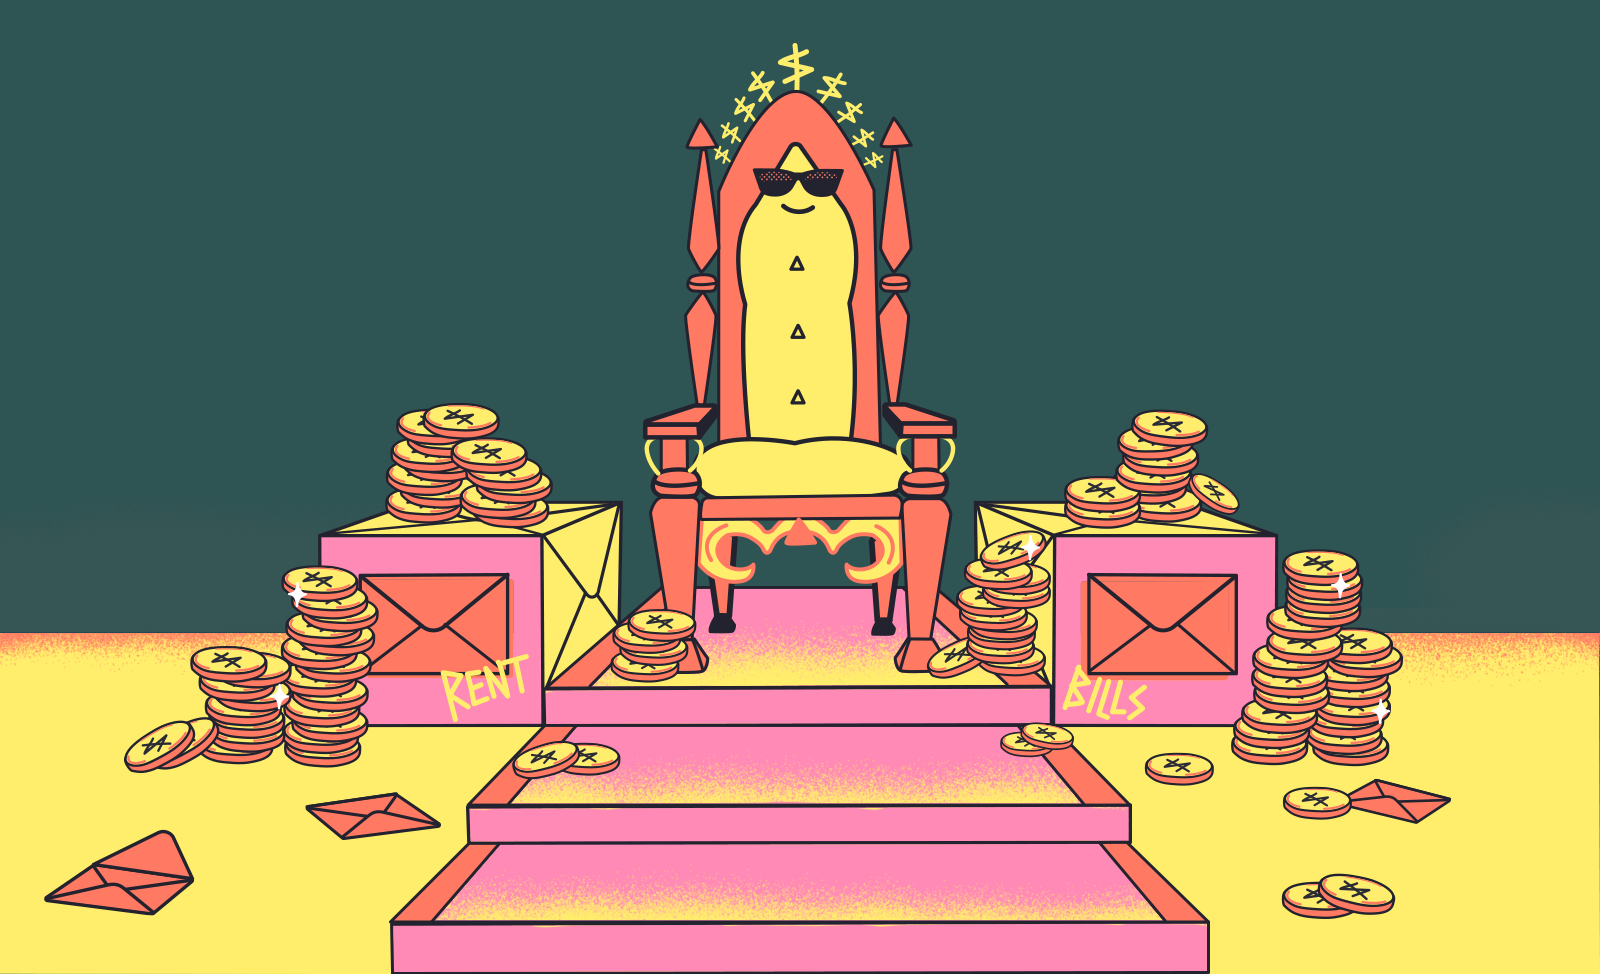 A throne surrounded by envelopes of cash